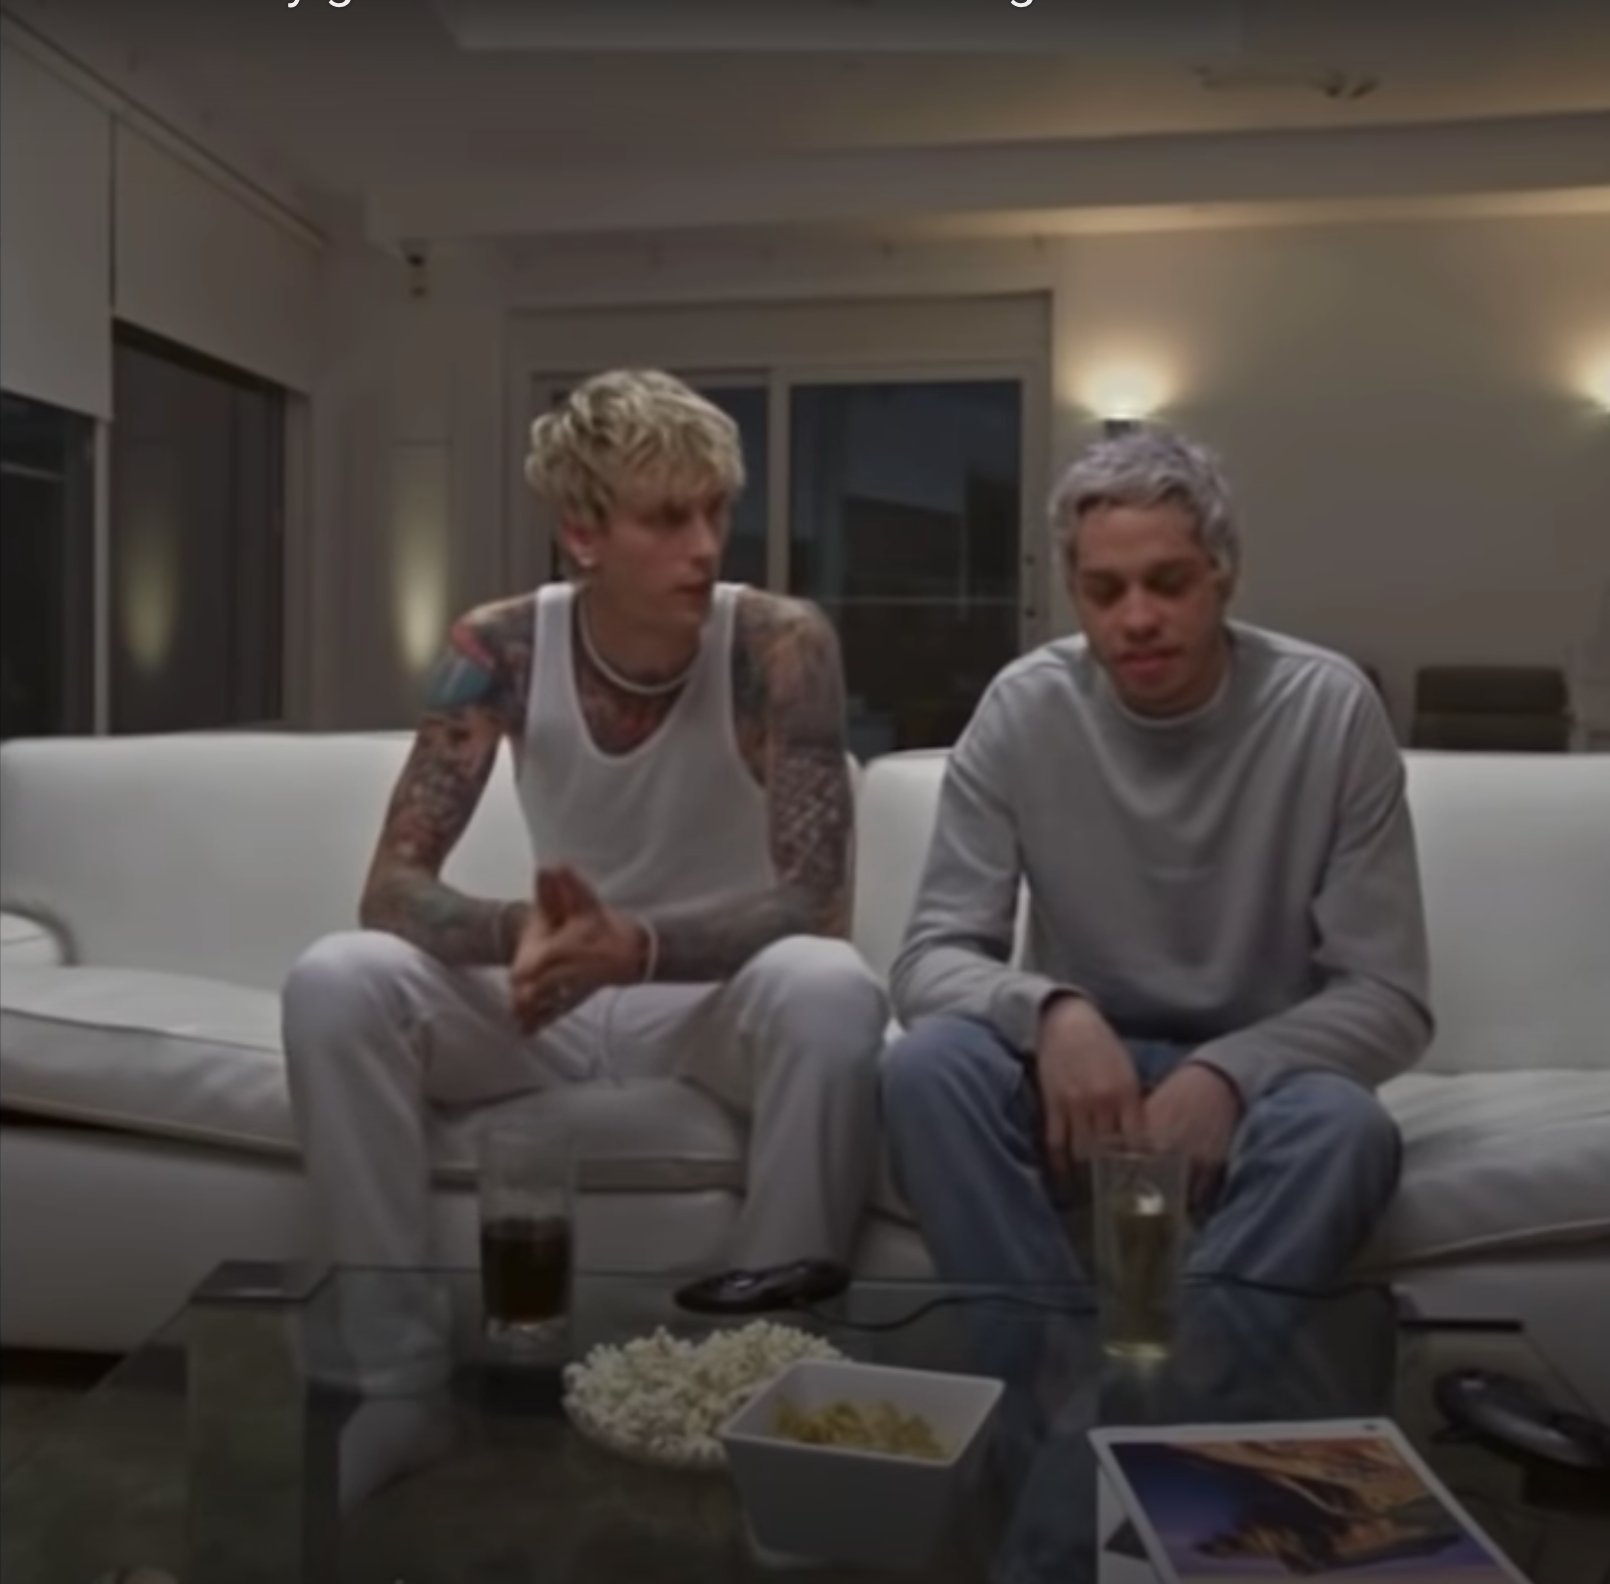 Pete Davidson & MGK on a couch